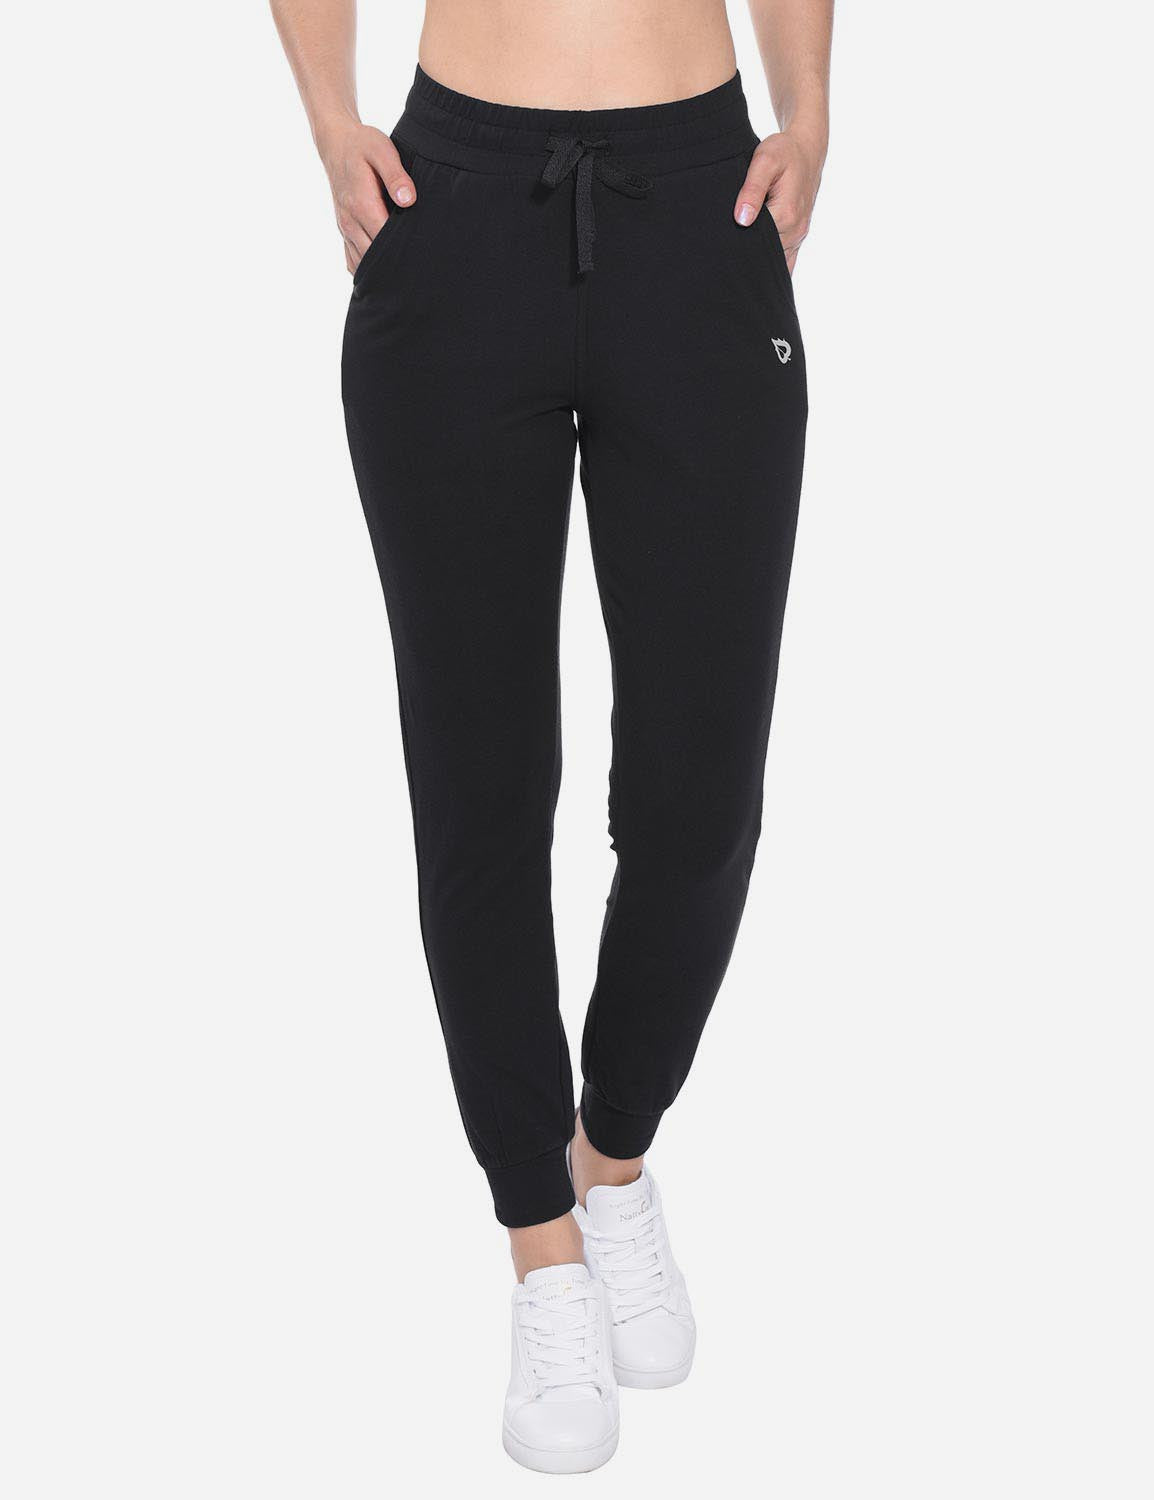 Baleaf Women's Cotton Comfy Pocketed & Tapered Weekend Joggers abh103 Black Front